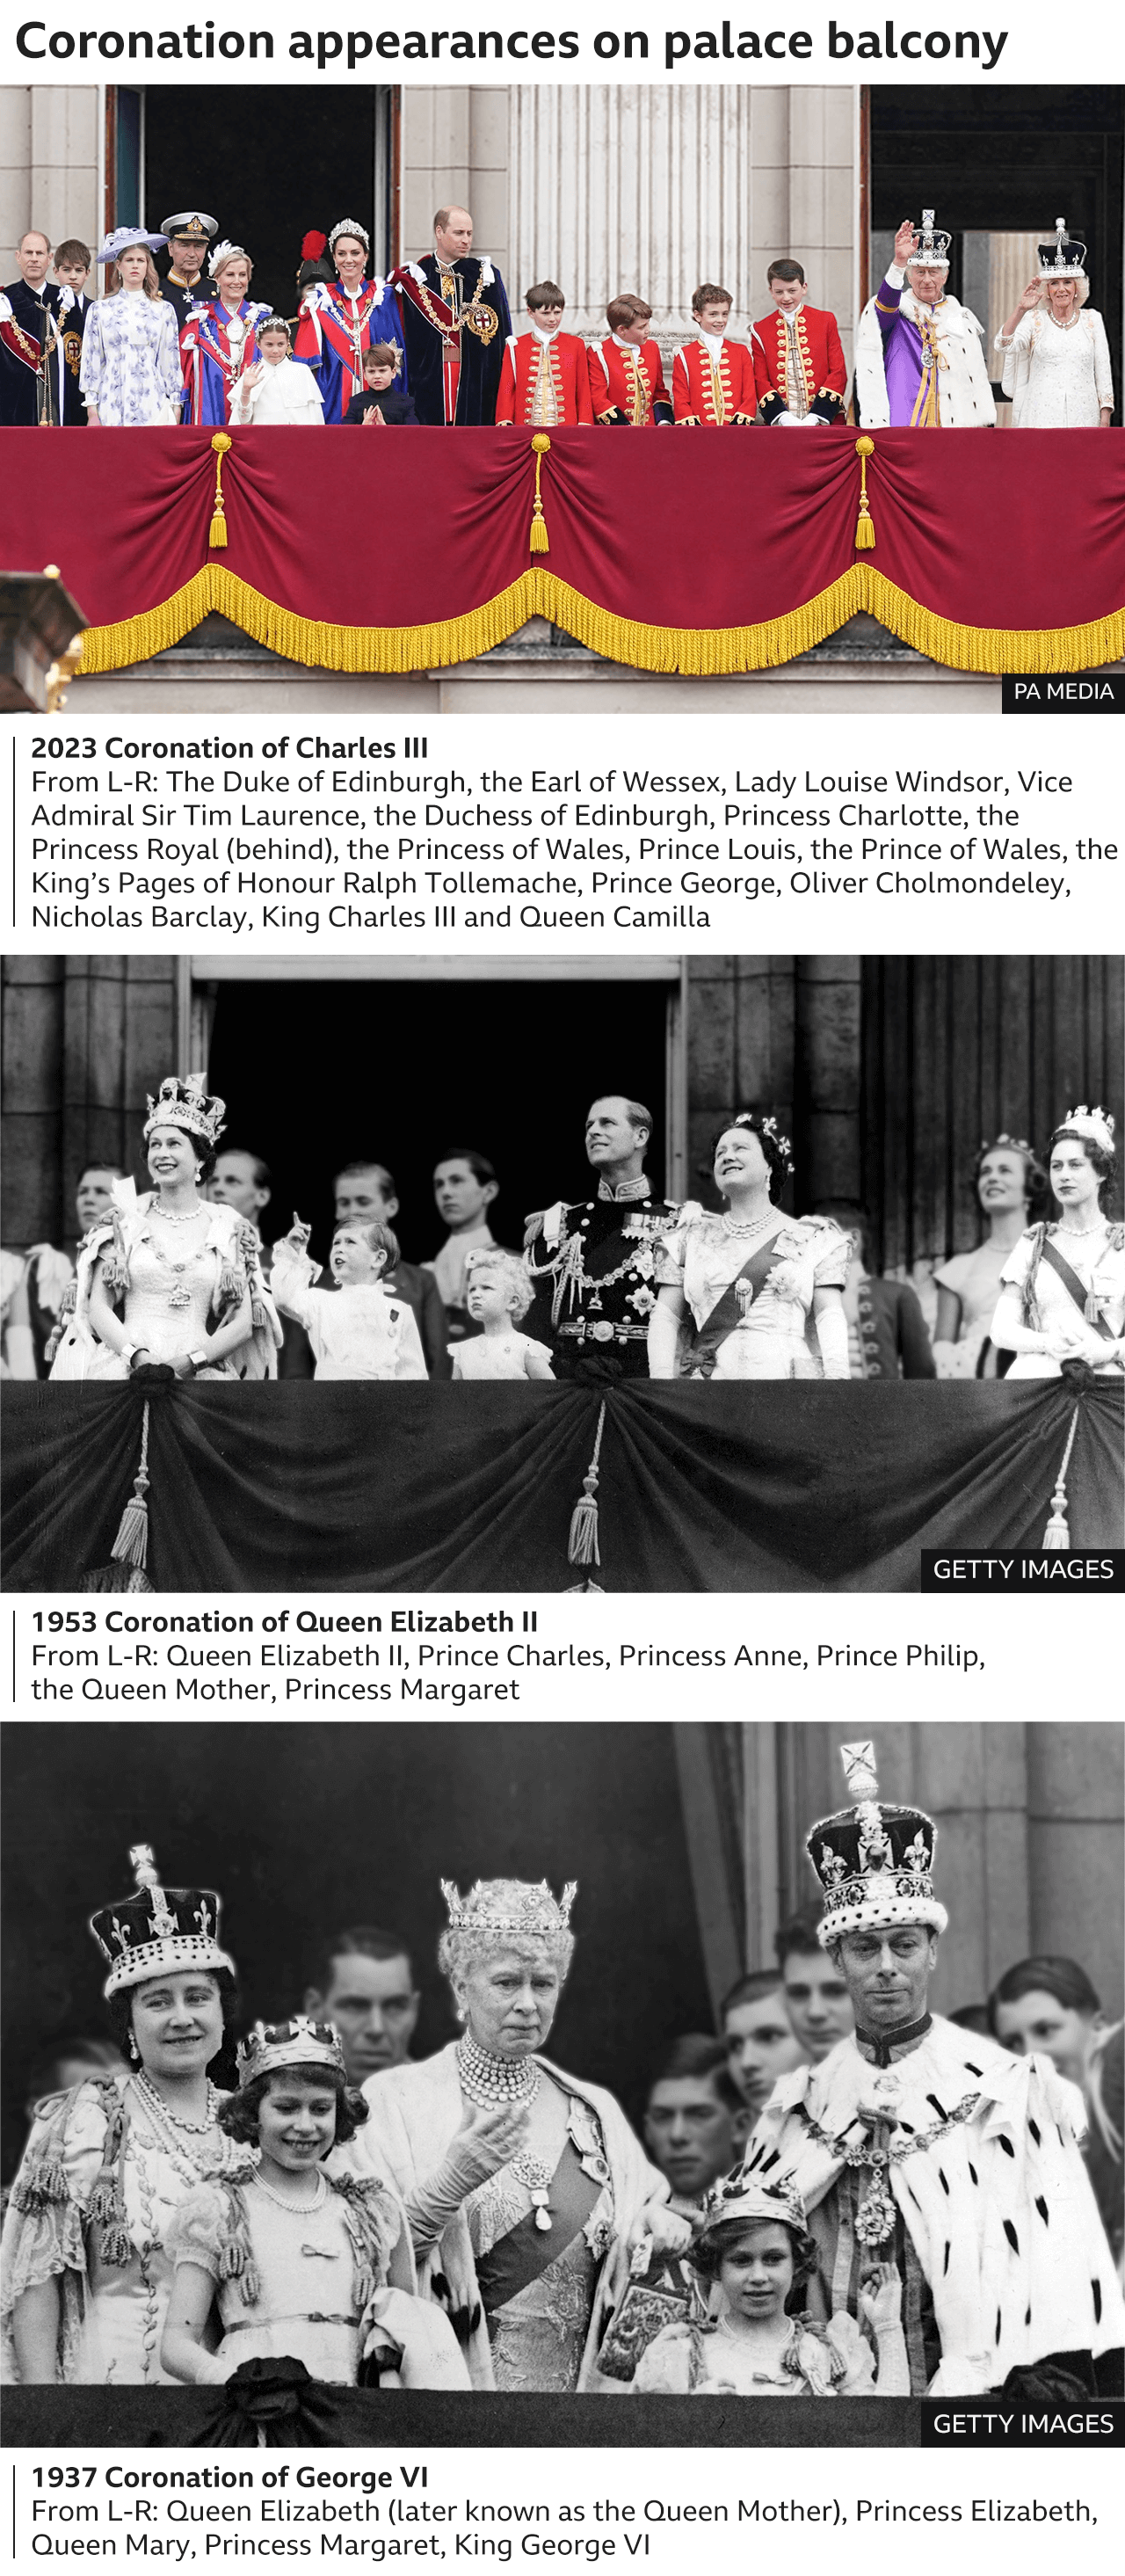 Graphic showing some of the people on the Buckingham Palace balcony at the coronations of King Charles III in 2023 -The Duke of Edinburgh, the Earl of Wessex, Lady Louise Windsor, Vice Admiral Sir Tim Laurence, the Duchess of Edinburgh, Princess Charlotte, the Princess Royal (behind), the Princess of Wales, Prince Louis, the Prince of Wales, the King's Pages of Honour Ralph Tollemache, Prince George, Oliver Cholmondeley, Nicholas Barclay, King Charles III and Queen Camilla - Queen Elizabeth II in 1953 - Queen Elizabeth II, Prince Charles, Princess Anne, Prince Philip, The Queen Mother, Princess Margaret - and George VI in 1937 - Queen Elizabeth (later known as the Queen Mother), Princess Elizabeth, Queen Mary, Princess Margaret, King George VI.